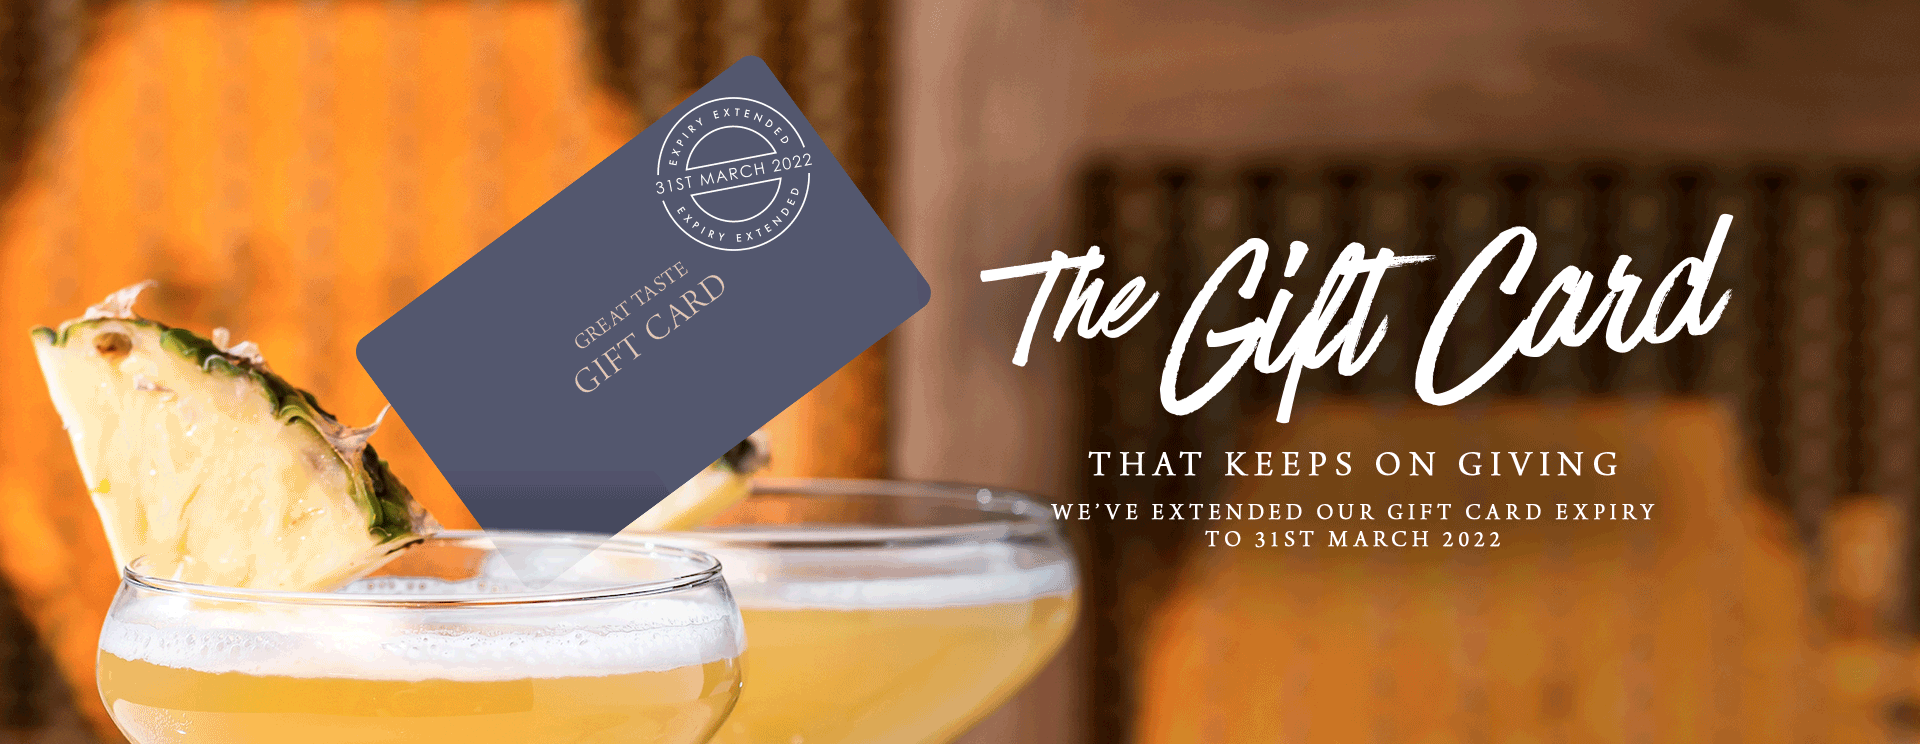 Give the gift of a gift card at The Green Man